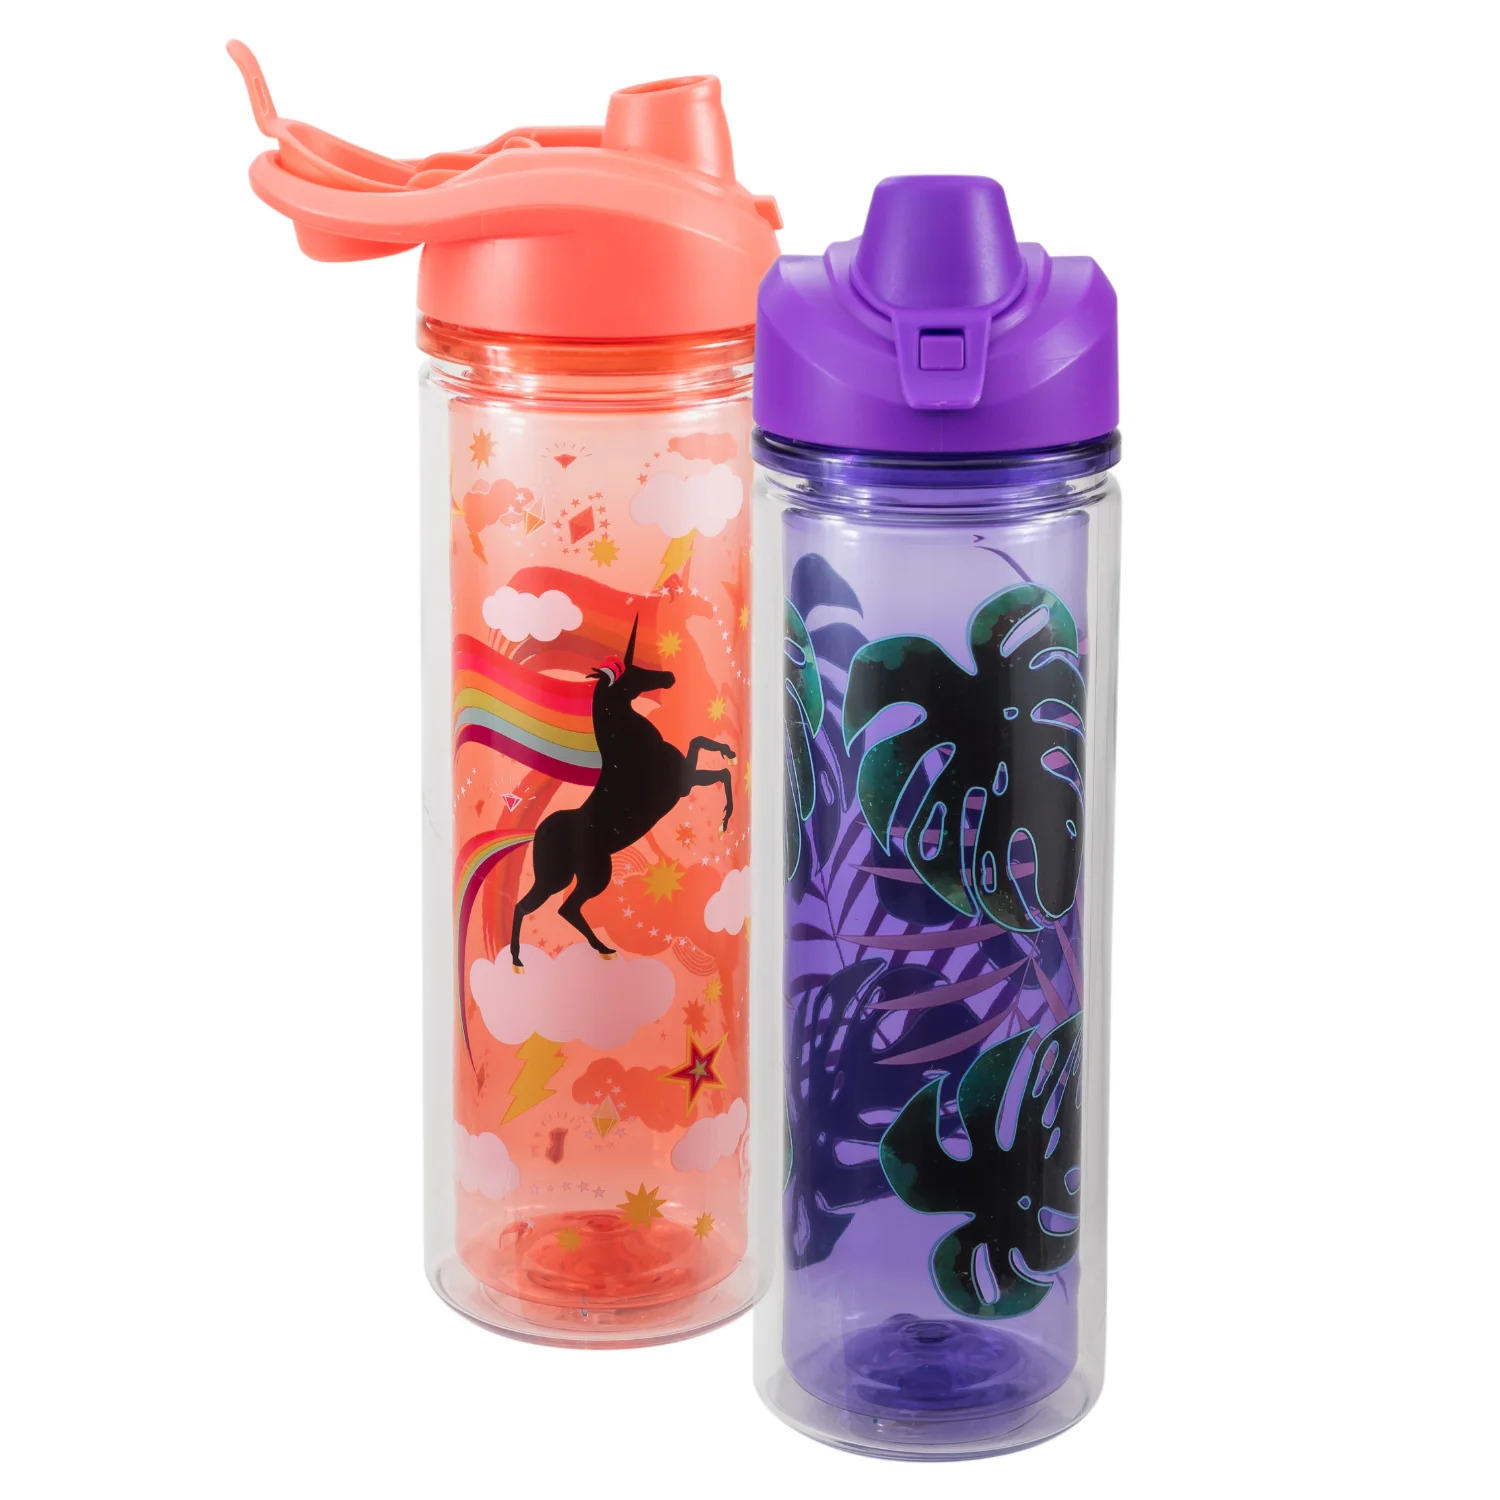 COOL GEAR 2-Pack 20 oz Essence Chugger Water Bottle with Wide Mouth & Flip Cap Design - Stay Wild/Fierce - image 1 of 6